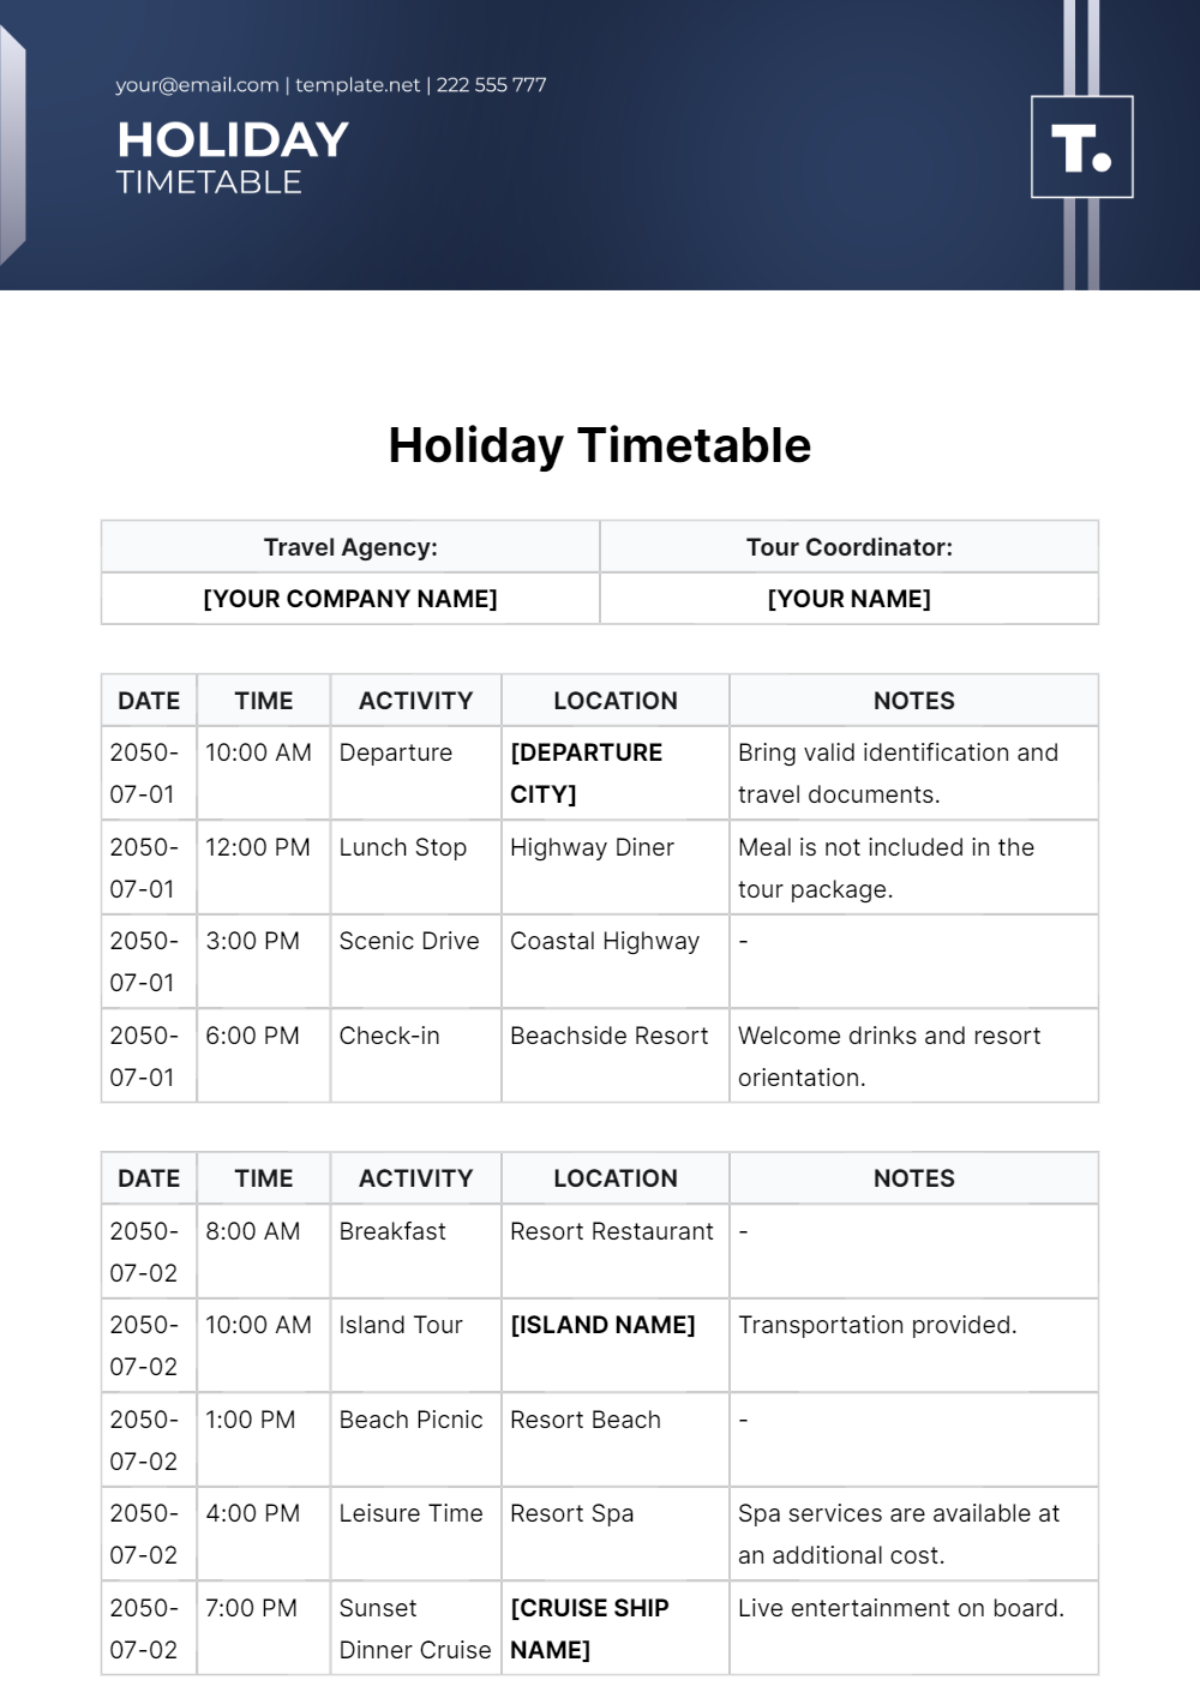 Free Holiday Timetable Template